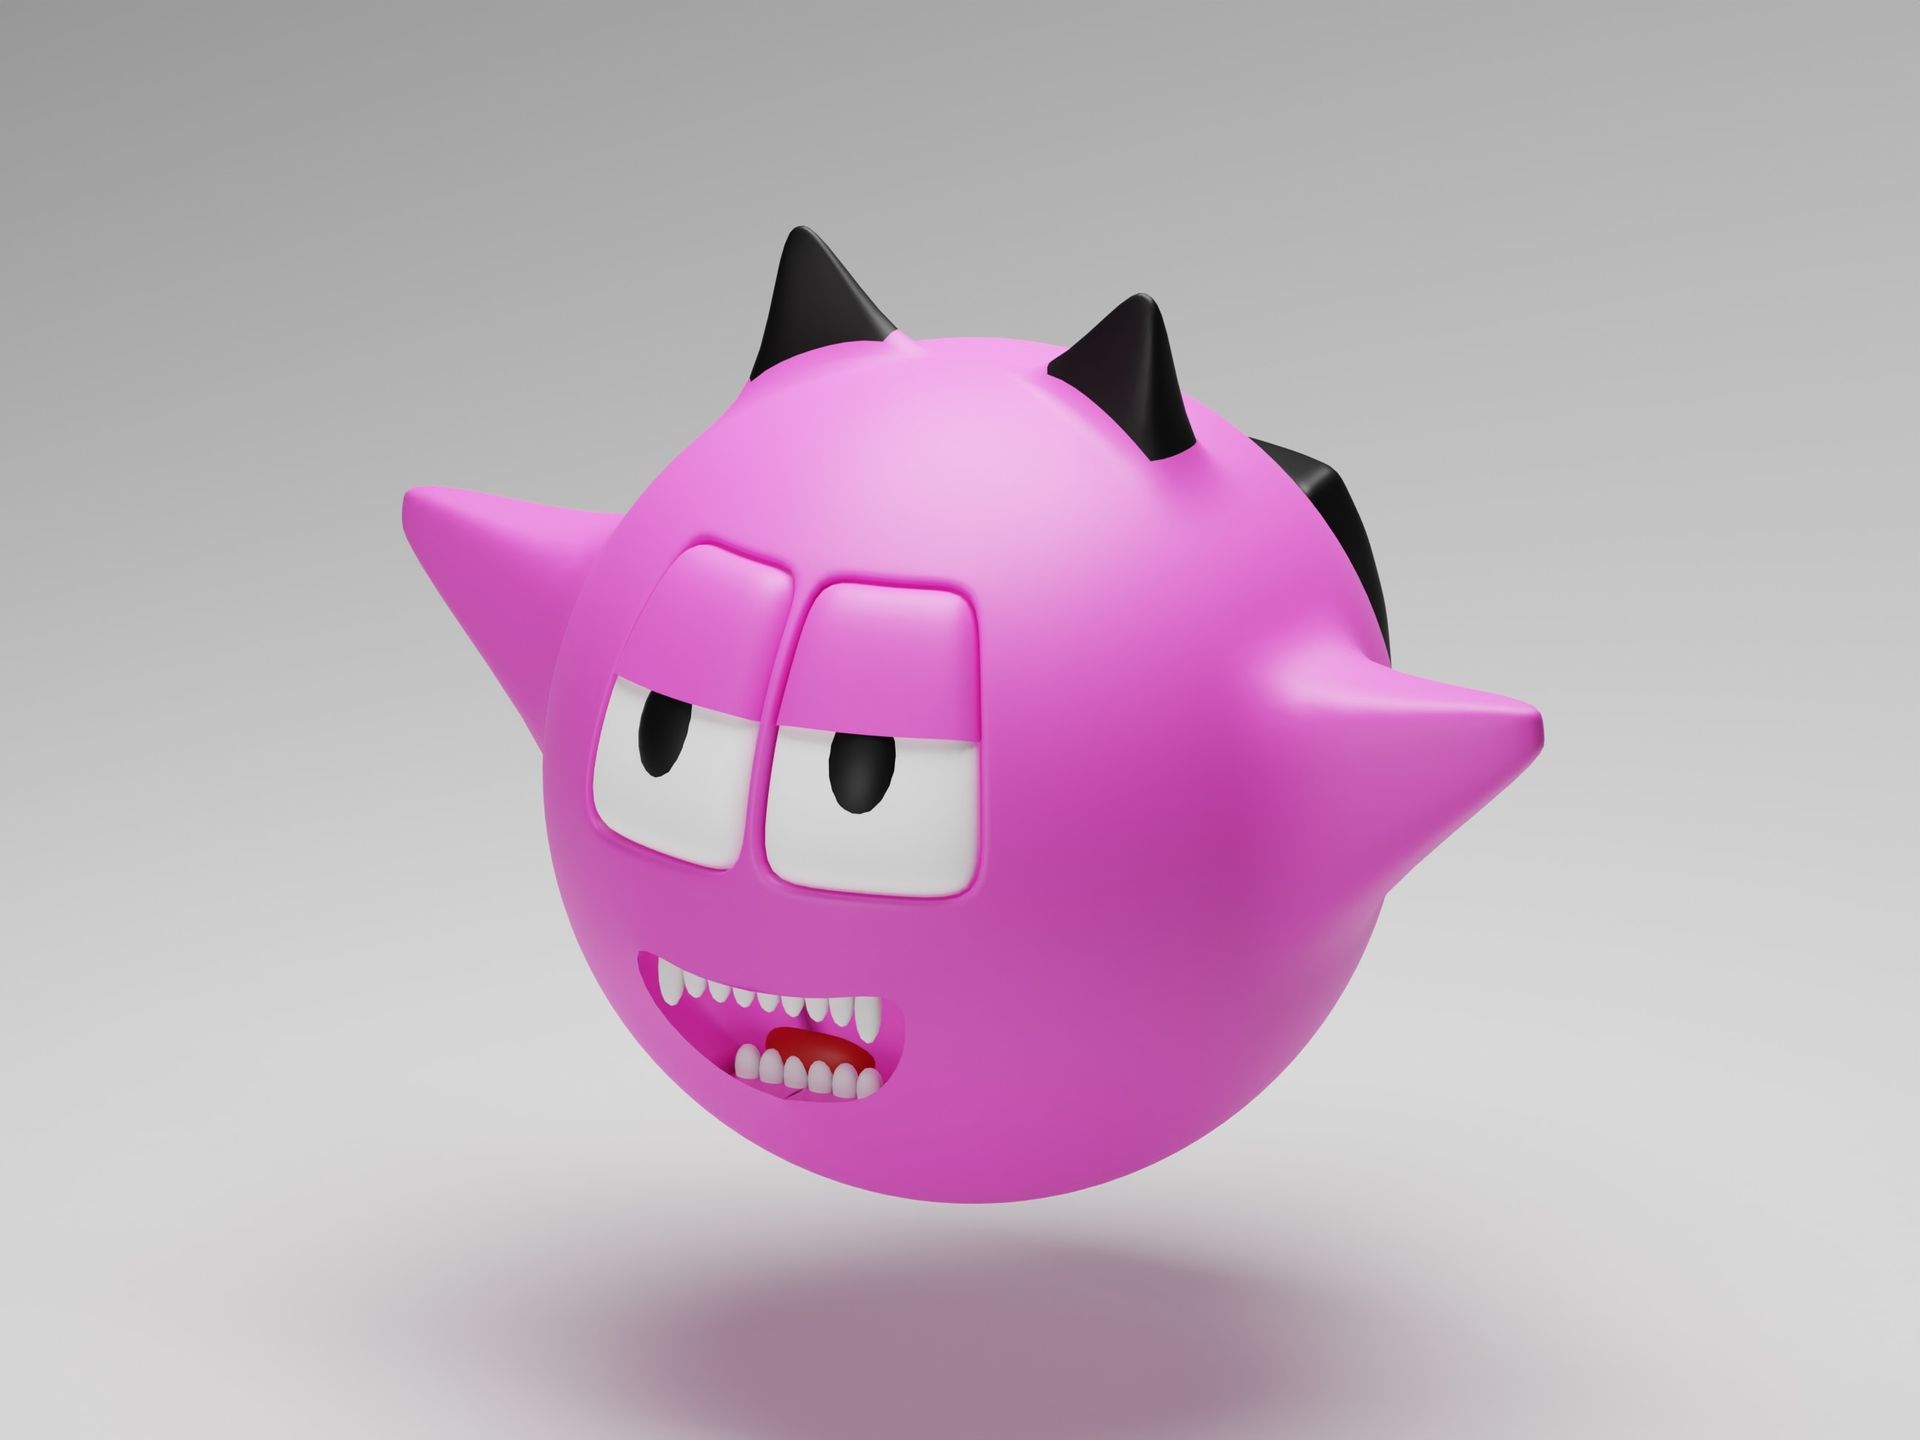 3D animated pink character